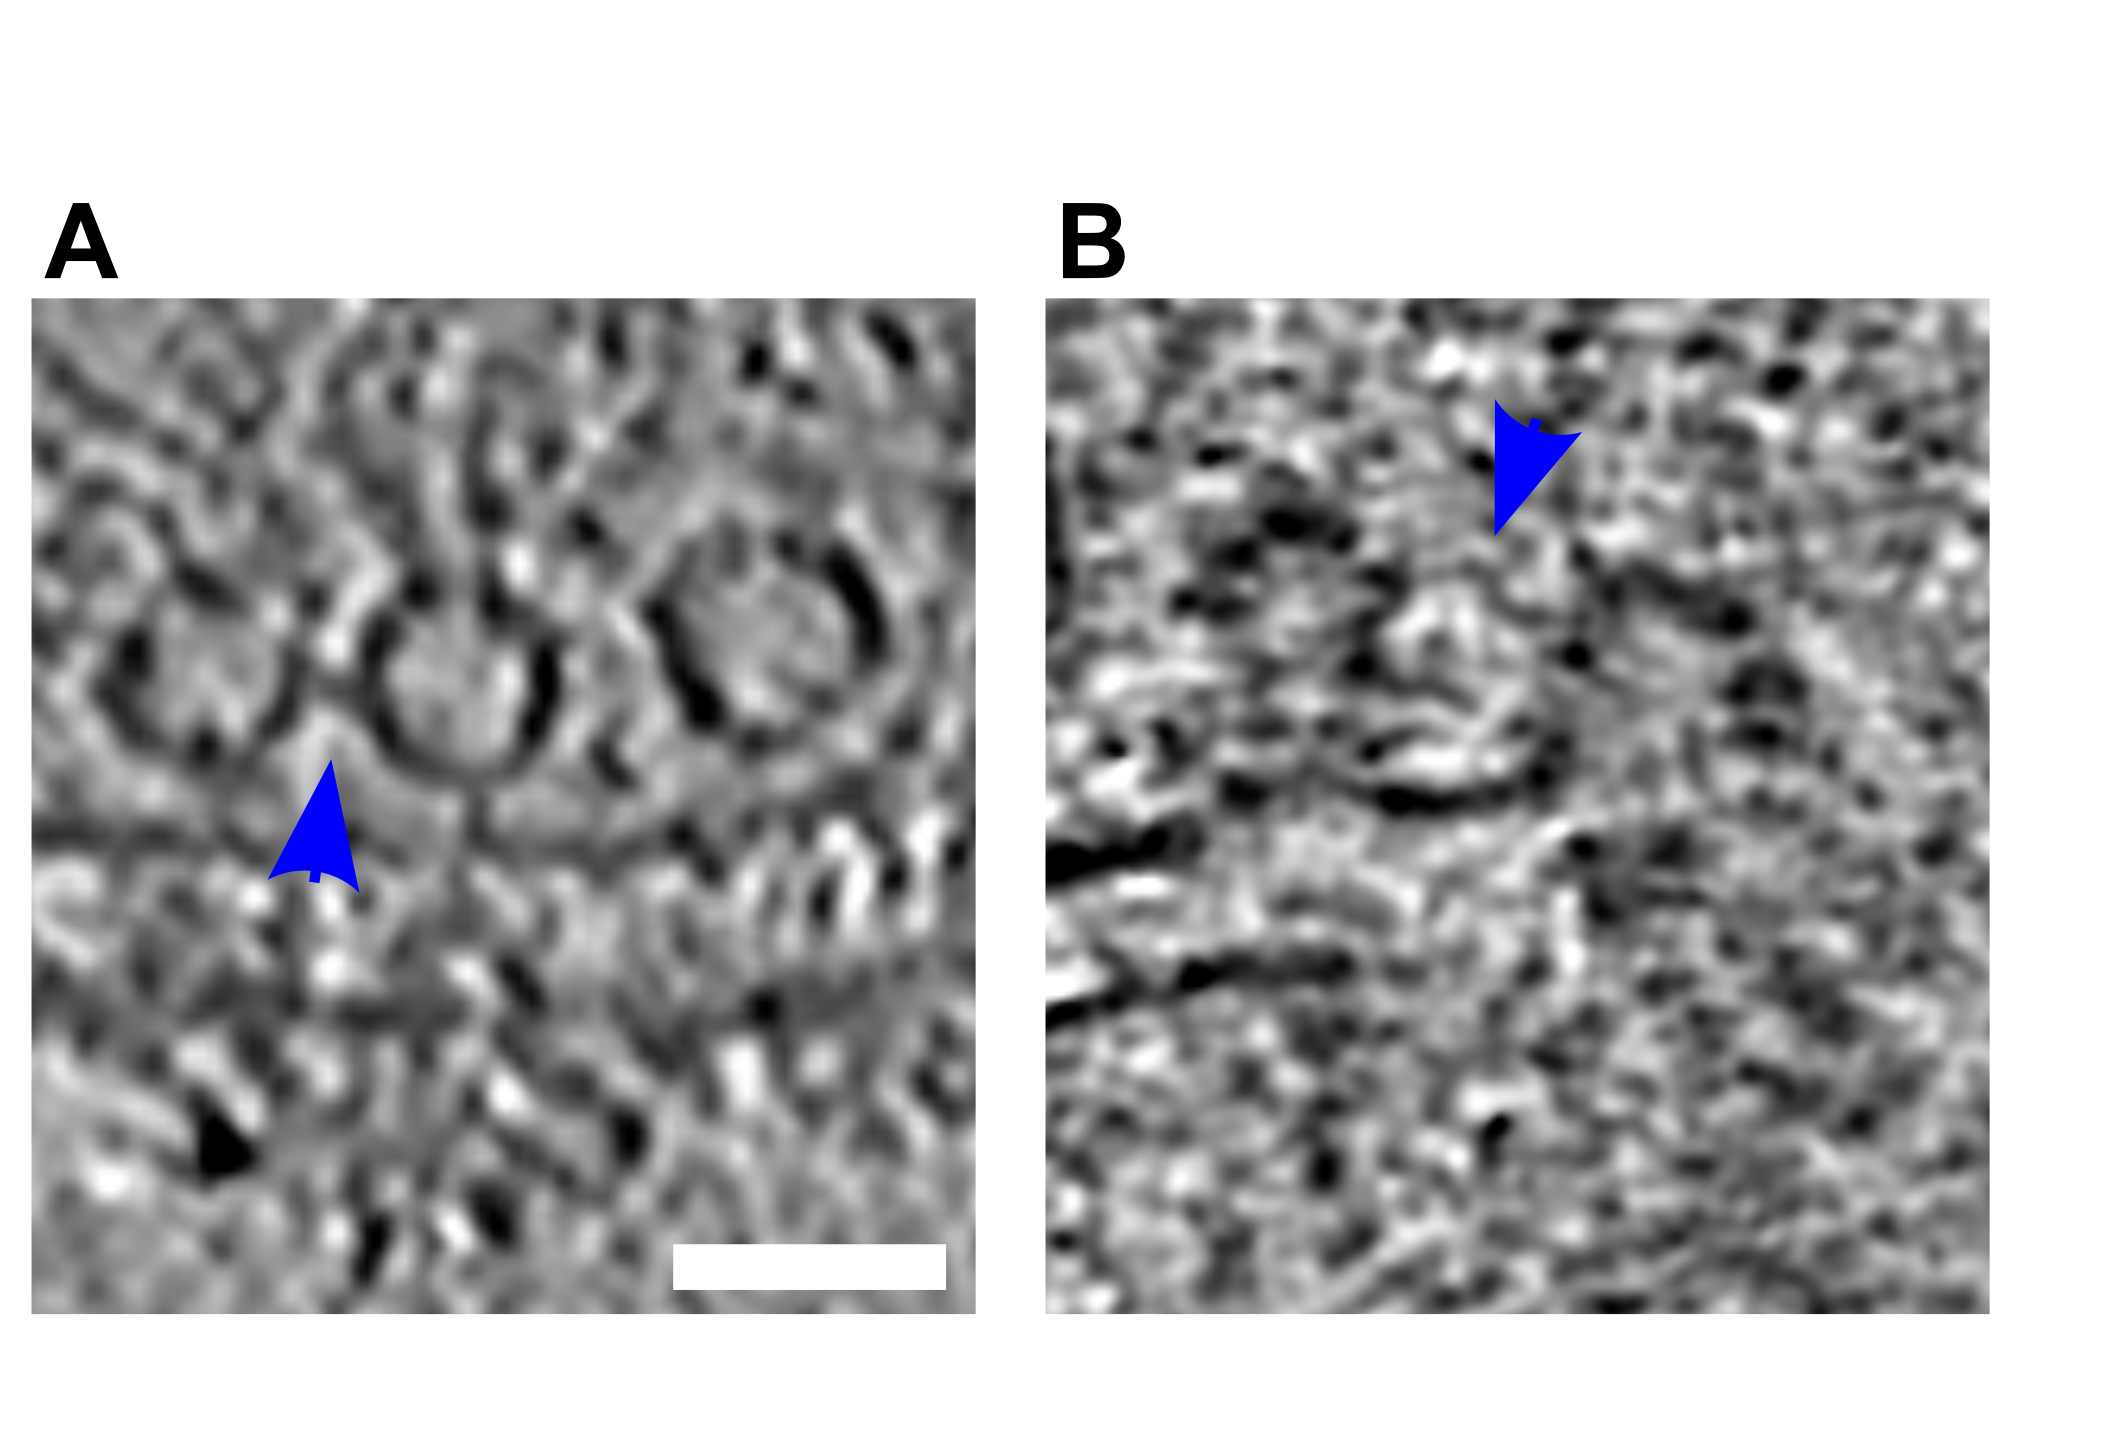 Figure S3: (A, B) Tomographic slices showing tethered connected vesicles, blue arrows highlight the connectors. Scale bar, 50 nm